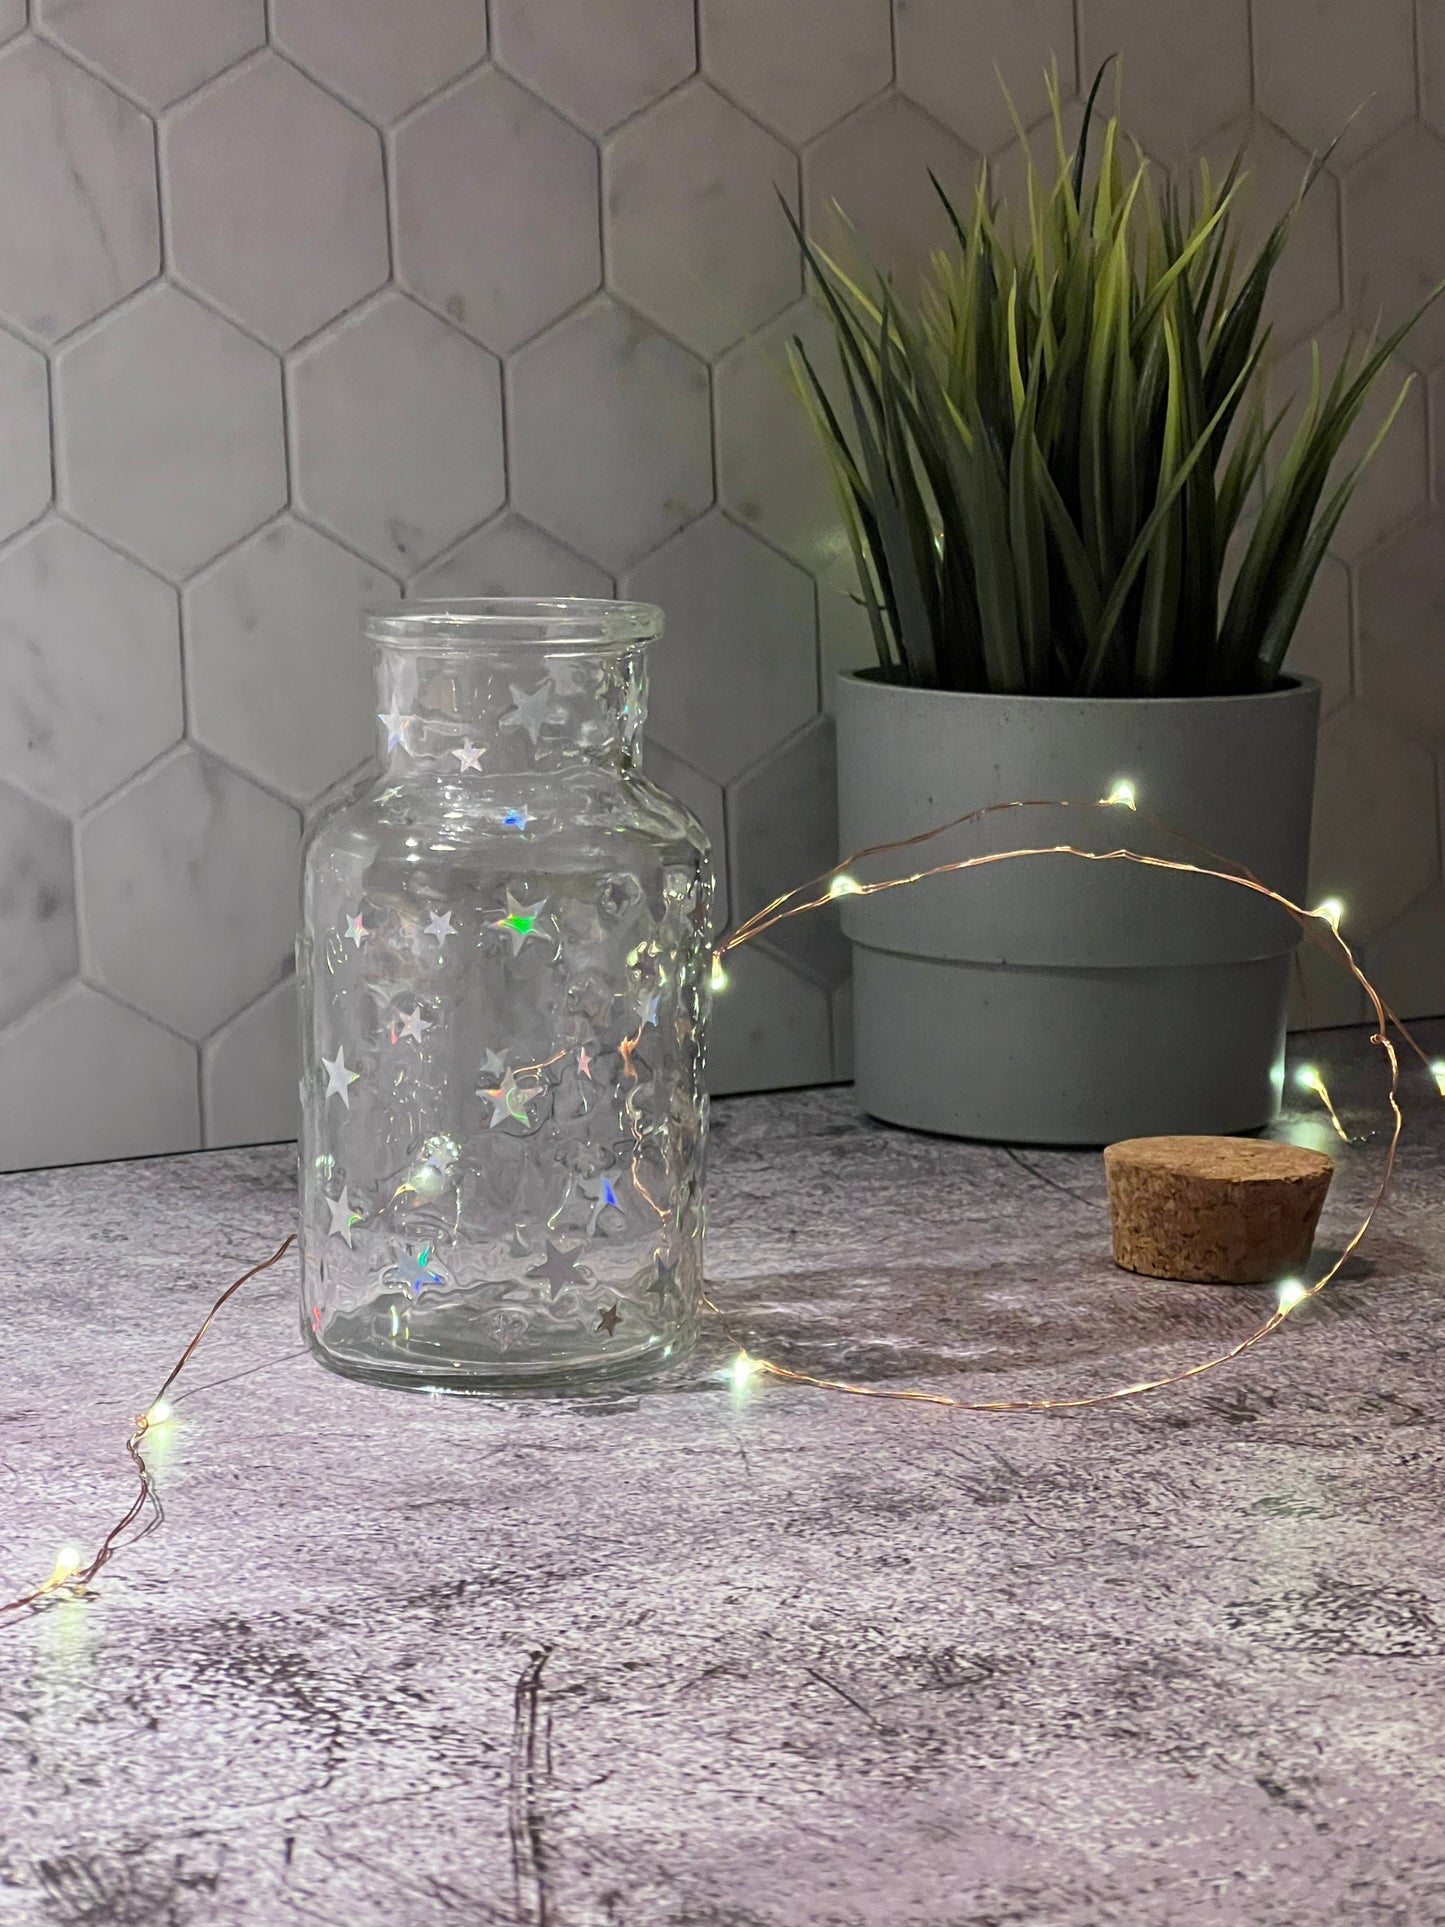 Potion Bottle Reed Diffuser - Holographic Stars